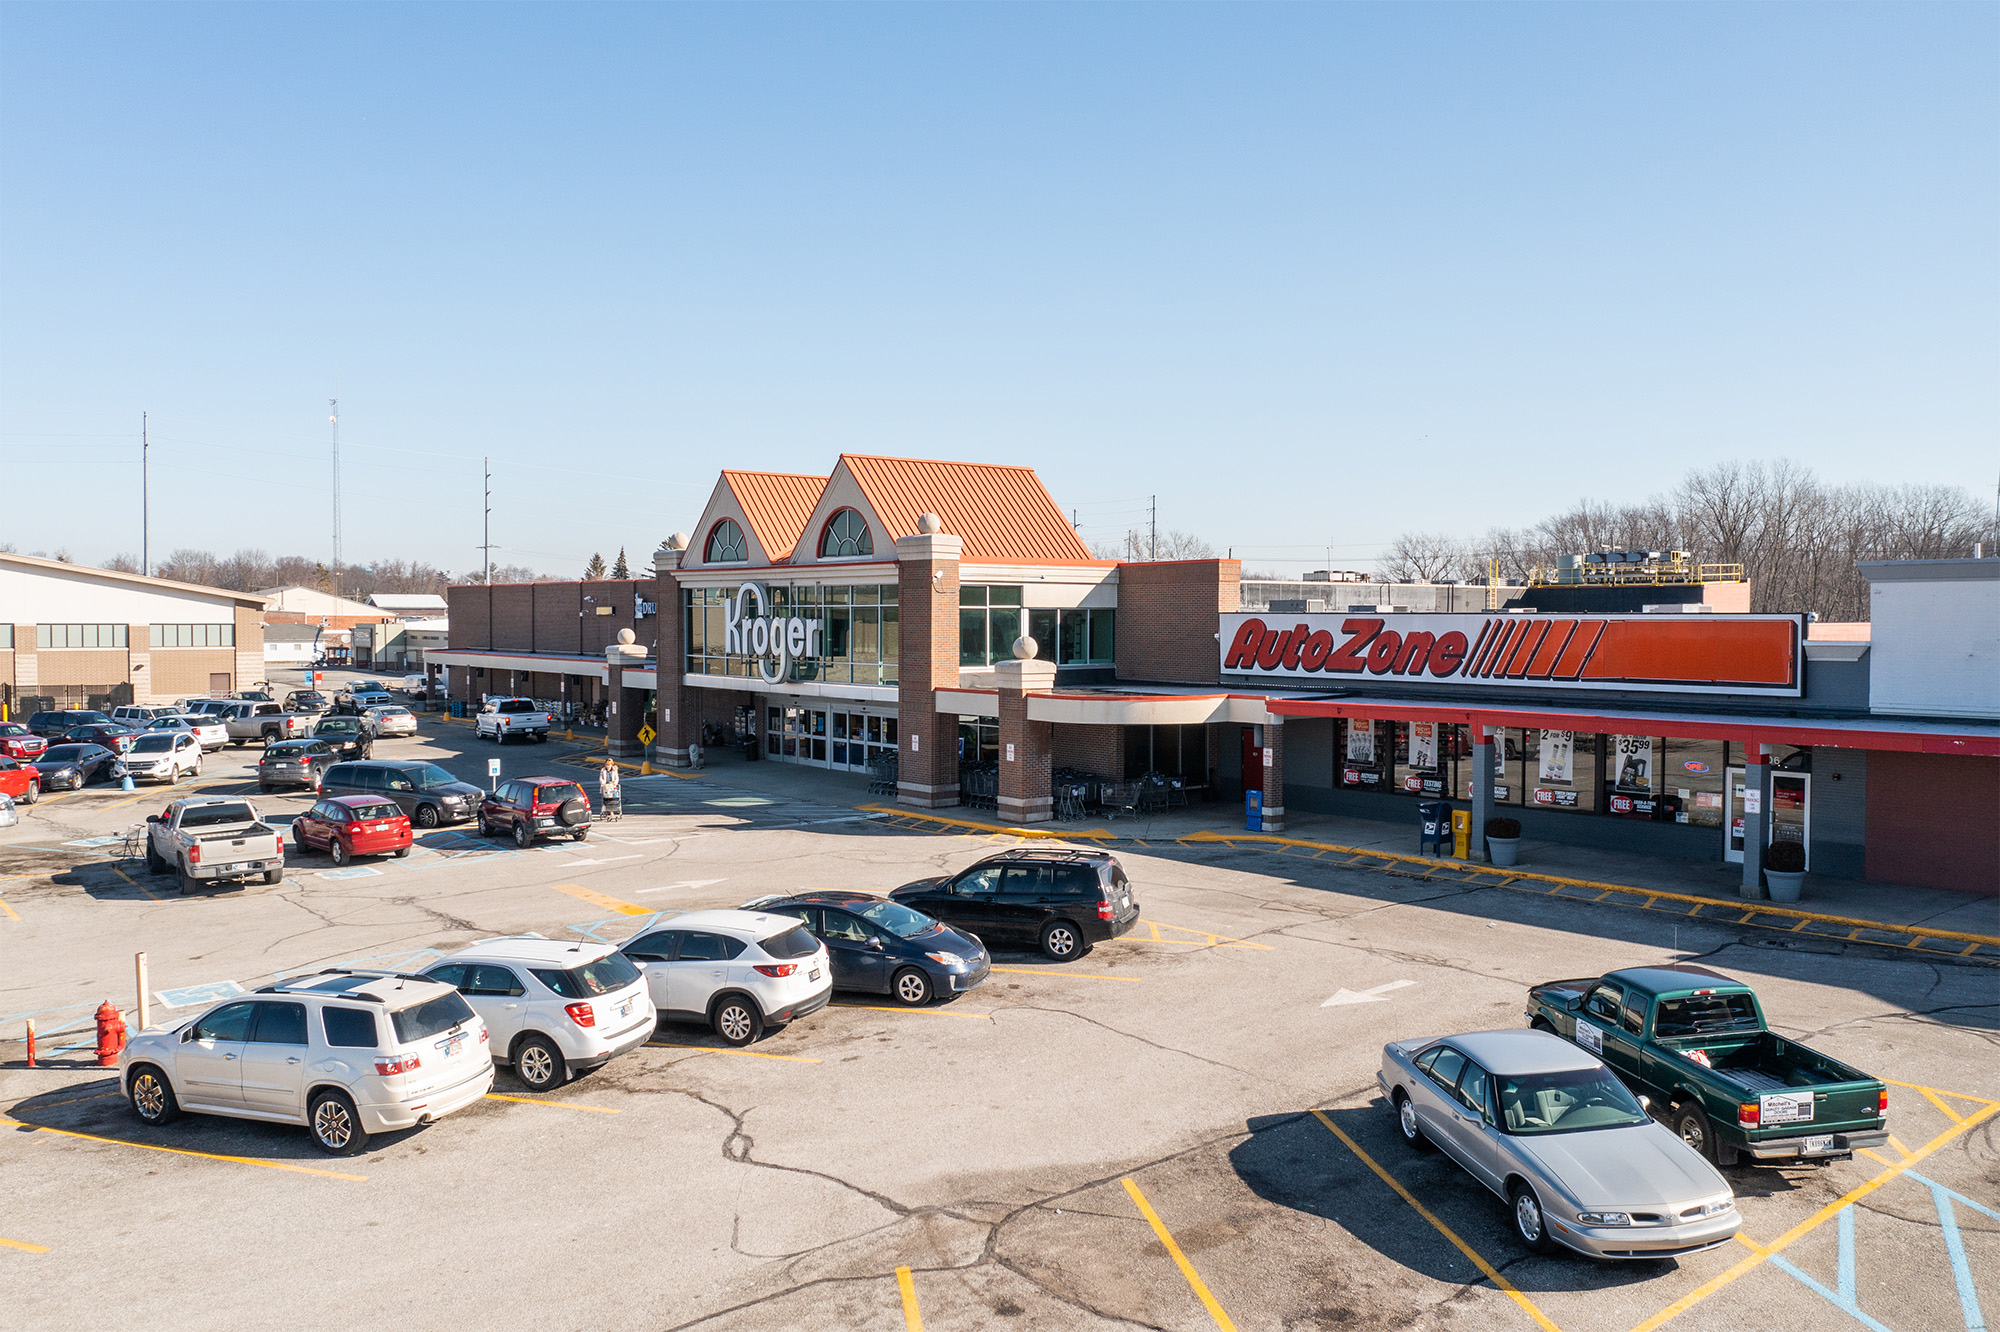 Drone view of Rushville Plaza Auto Zone and Kroger storefronts.